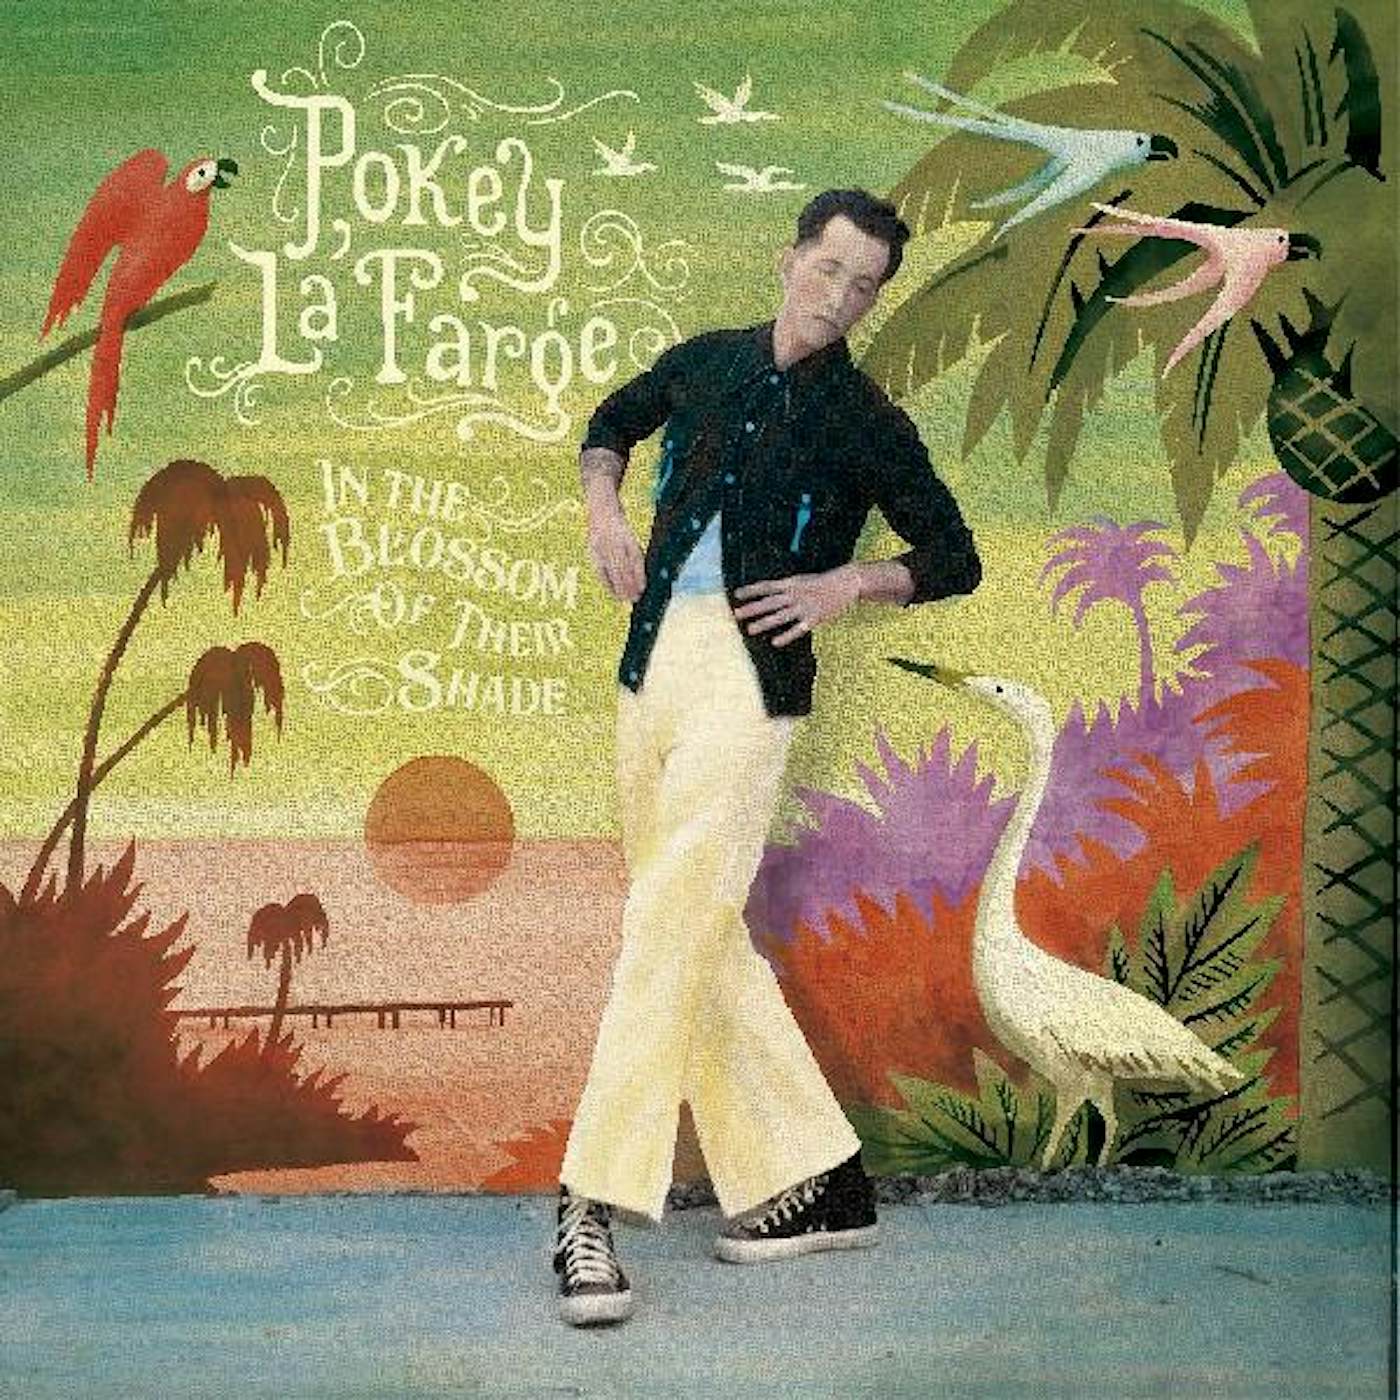 Pokey LaFarge In The Blossom of Their Shade Vinyl Record